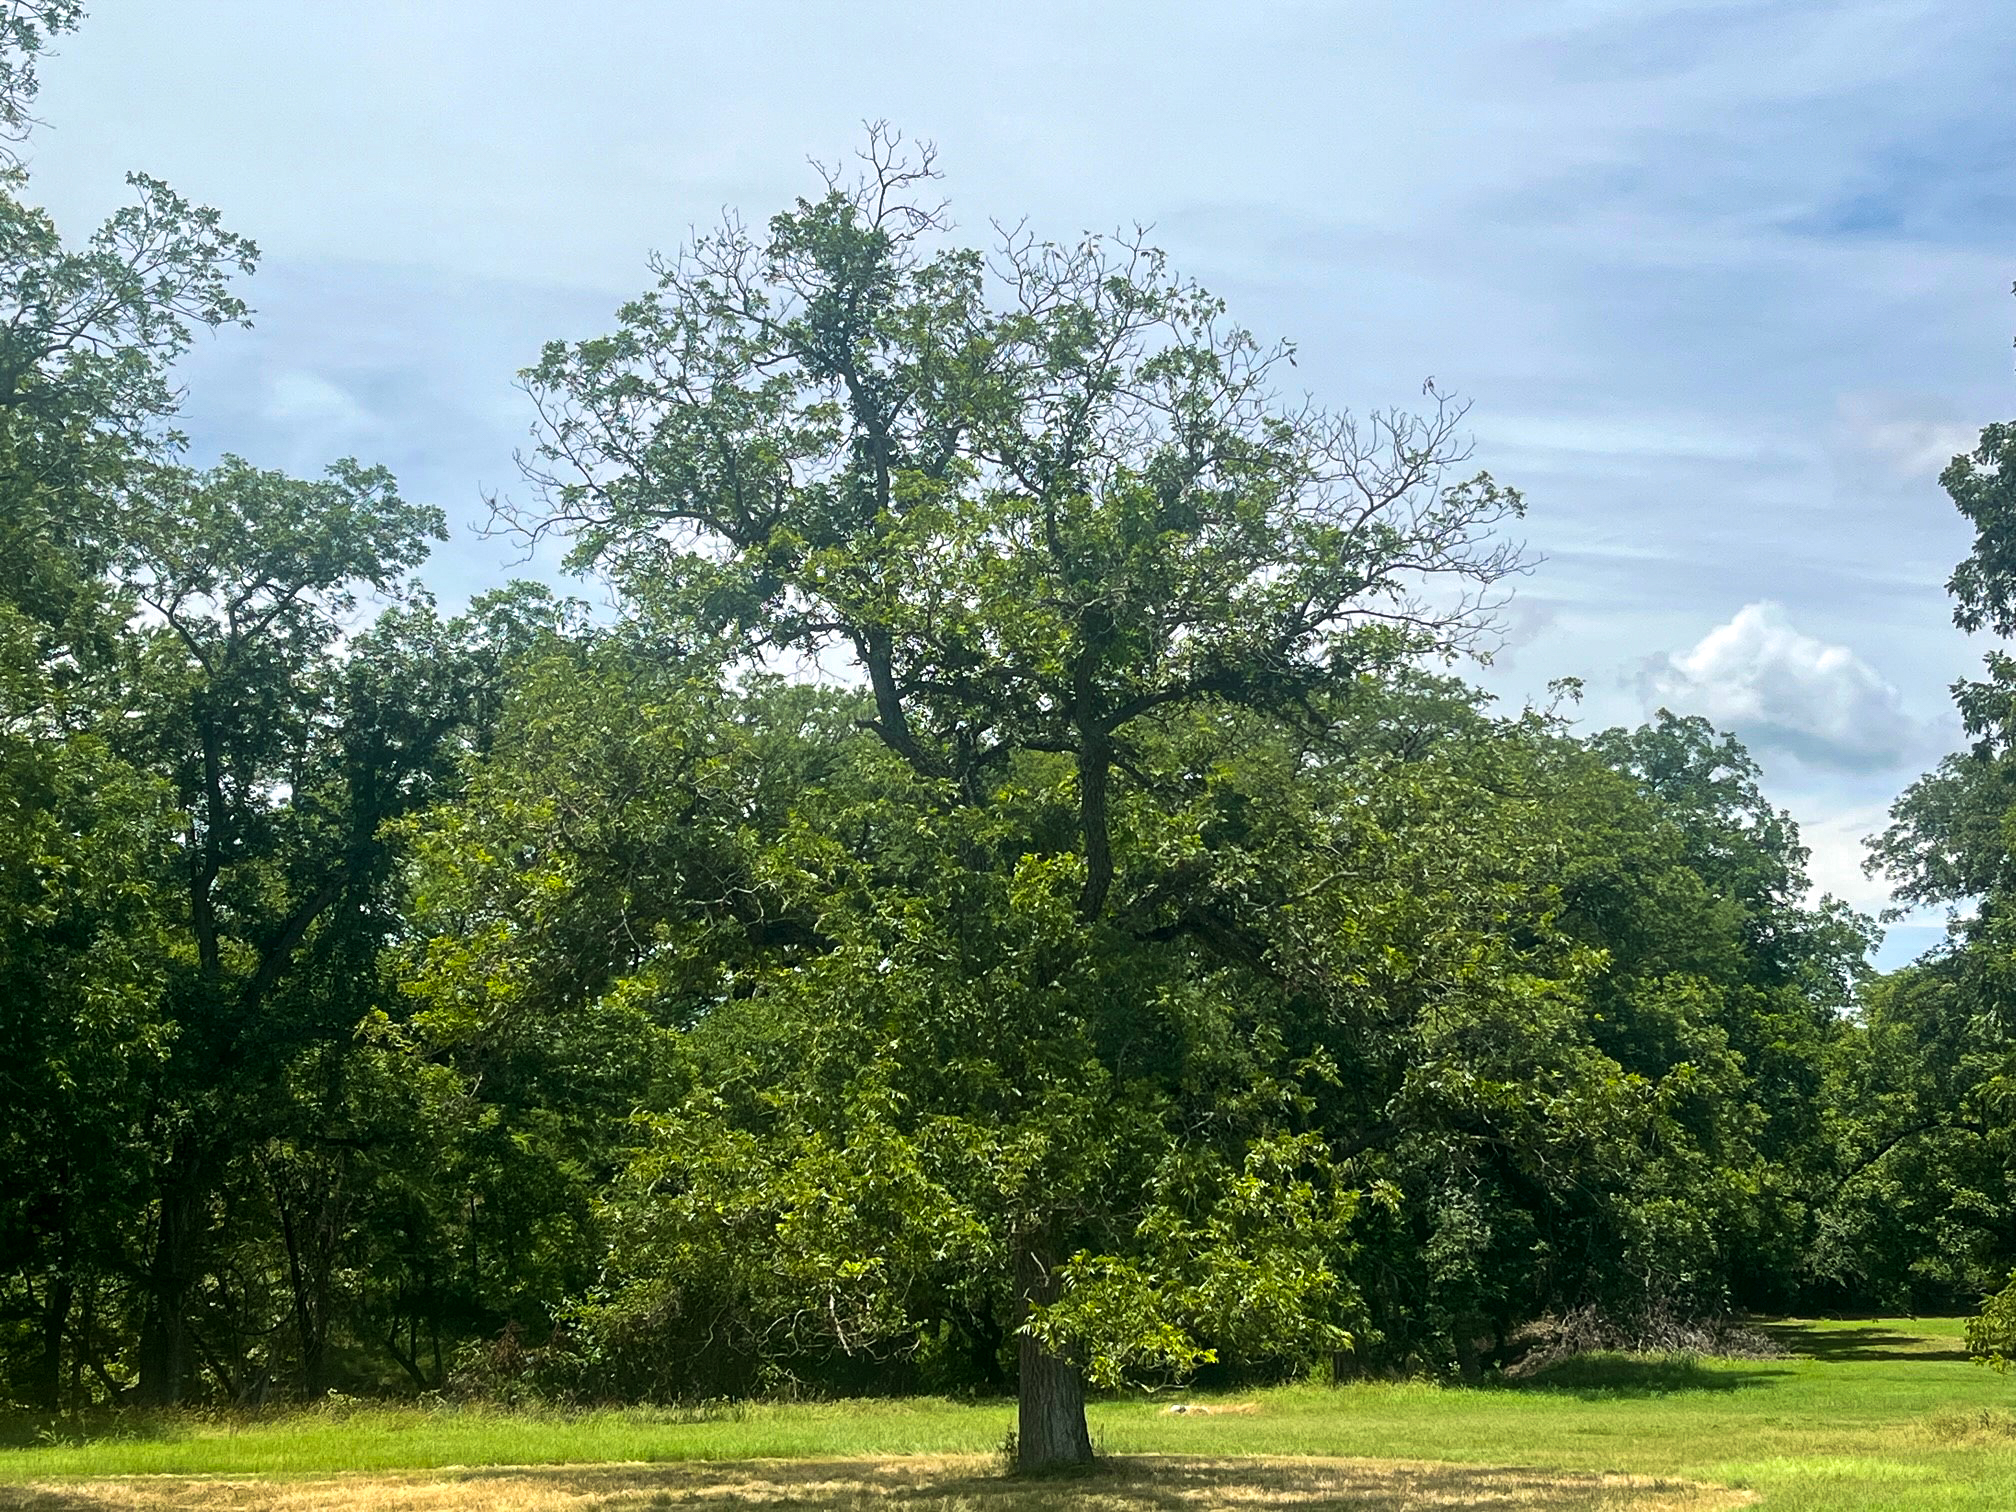 This mature pecan tree exhibits signs of stress as the extreme heat and drought continue this summer.